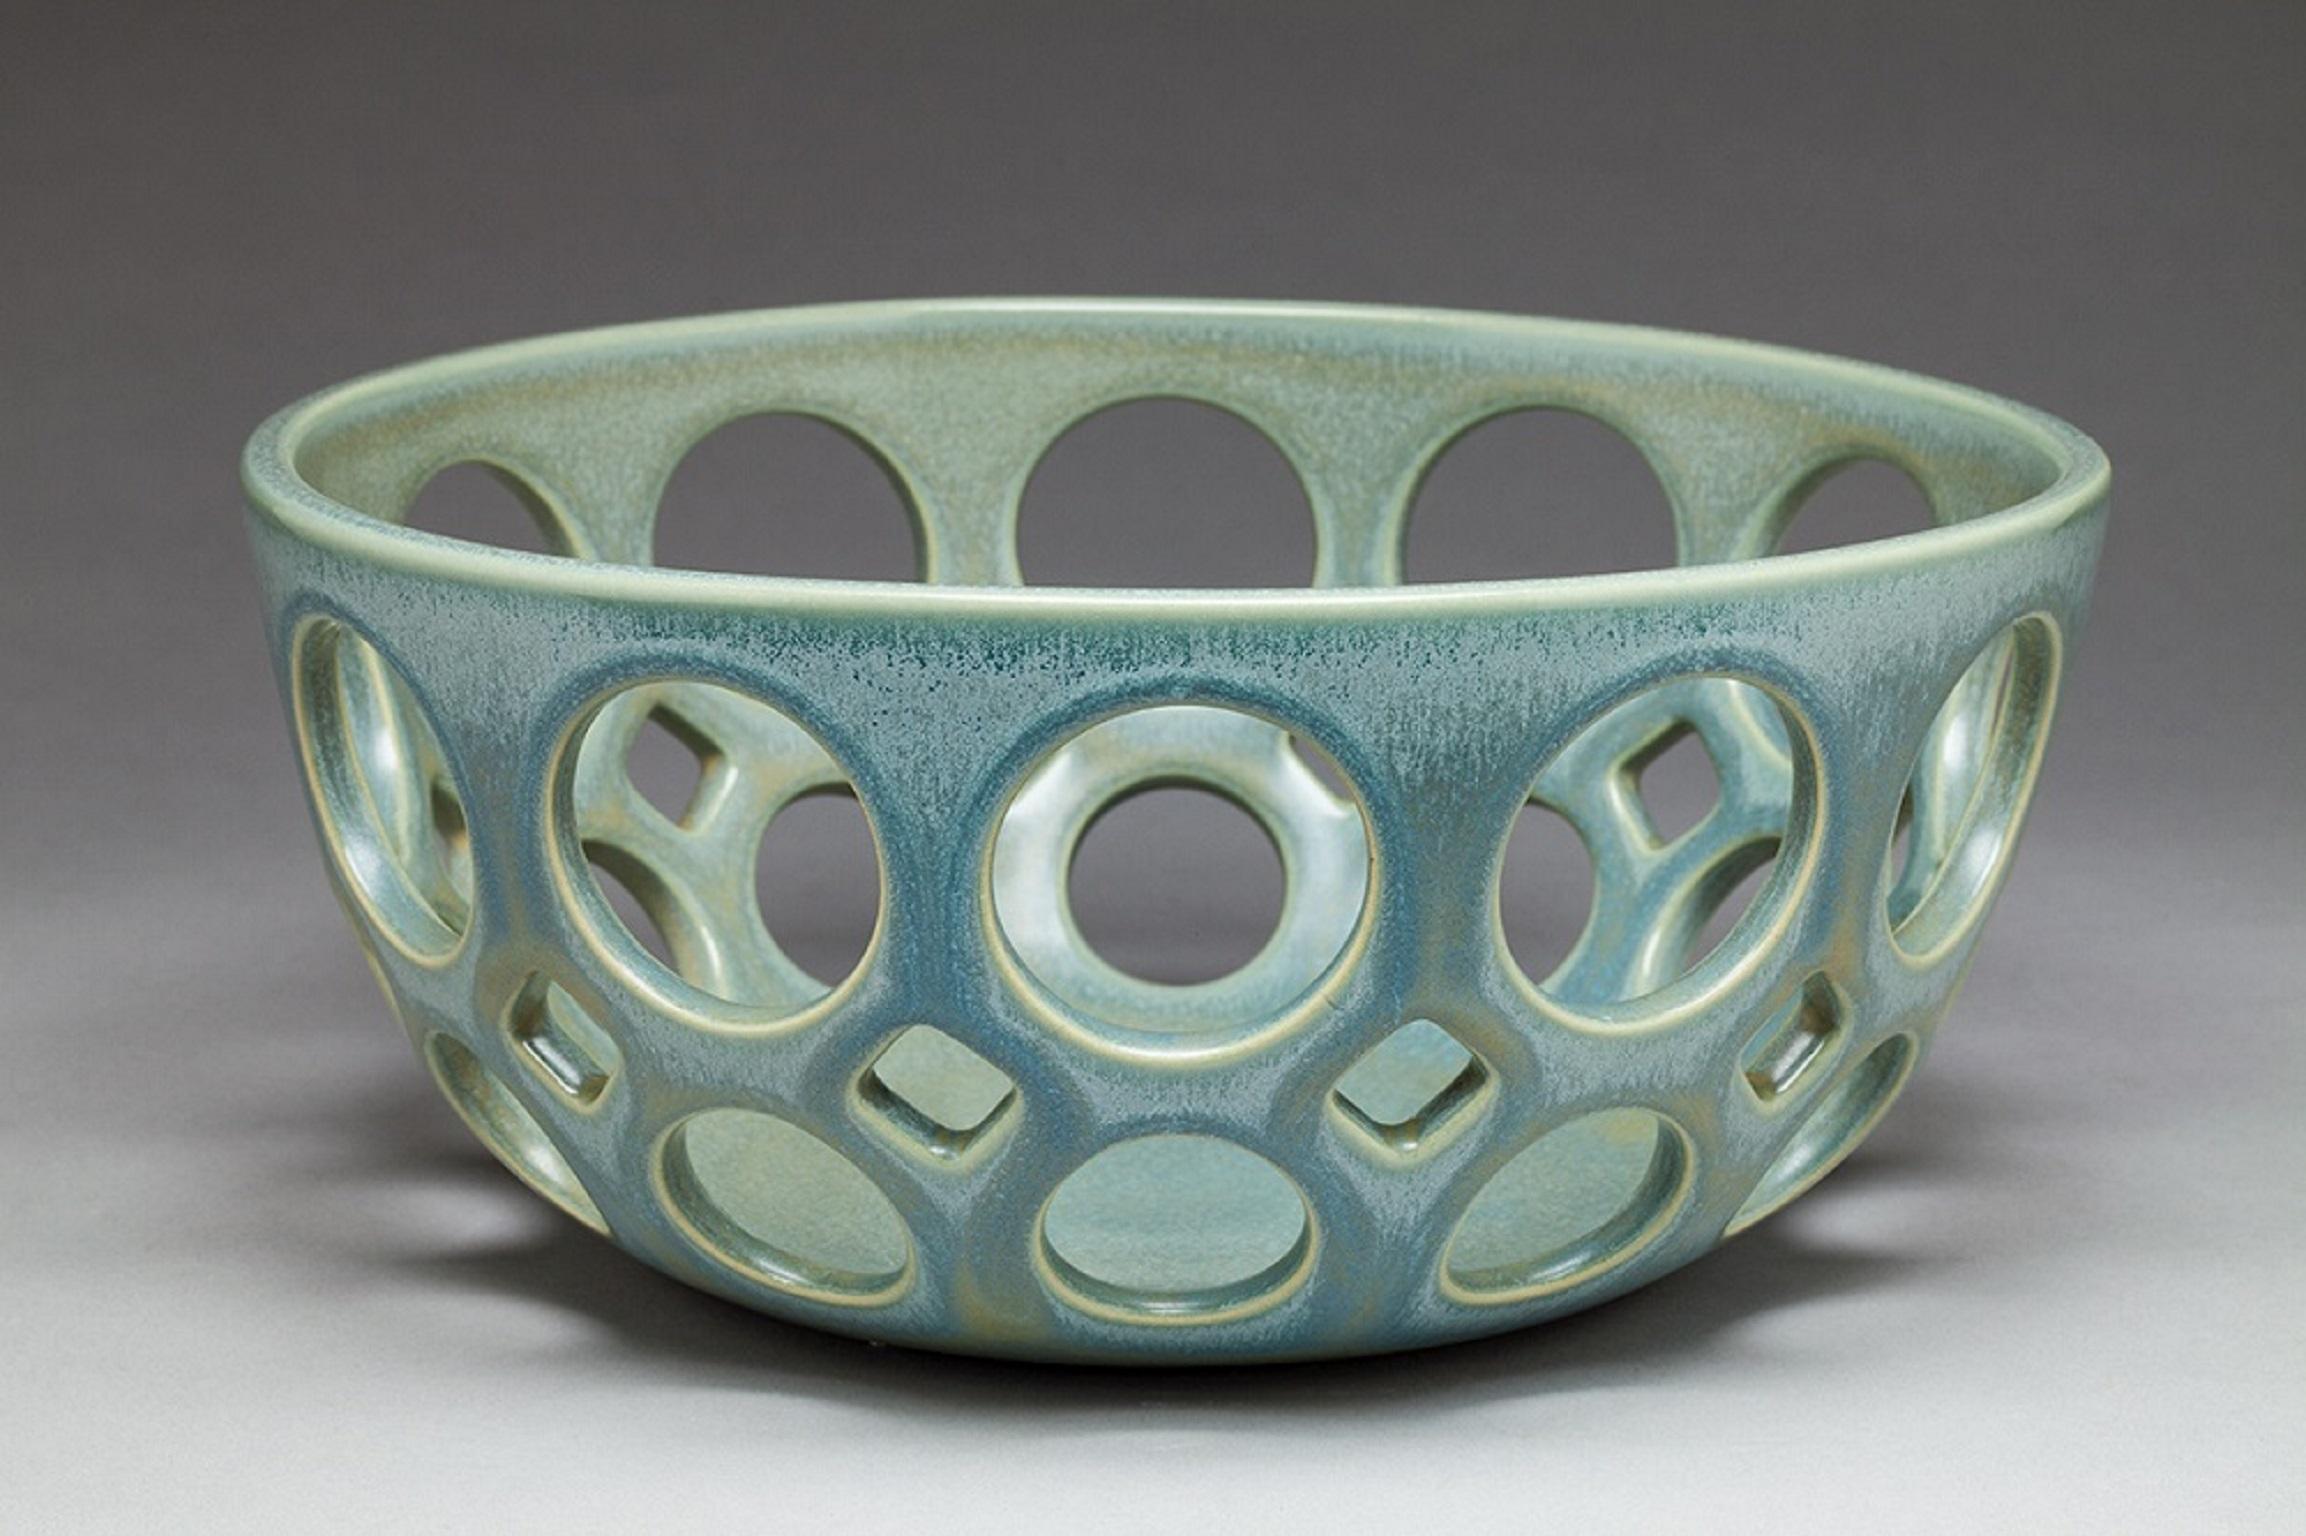 Inspired by Mid-Century Modern design, this bowl is wheel thrown and hand pierced stoneware. The satin glaze varies subtly from moss green to blue to gray. Controlled, slow cooling in the kiln allows tiny crystalline structures to form creating a